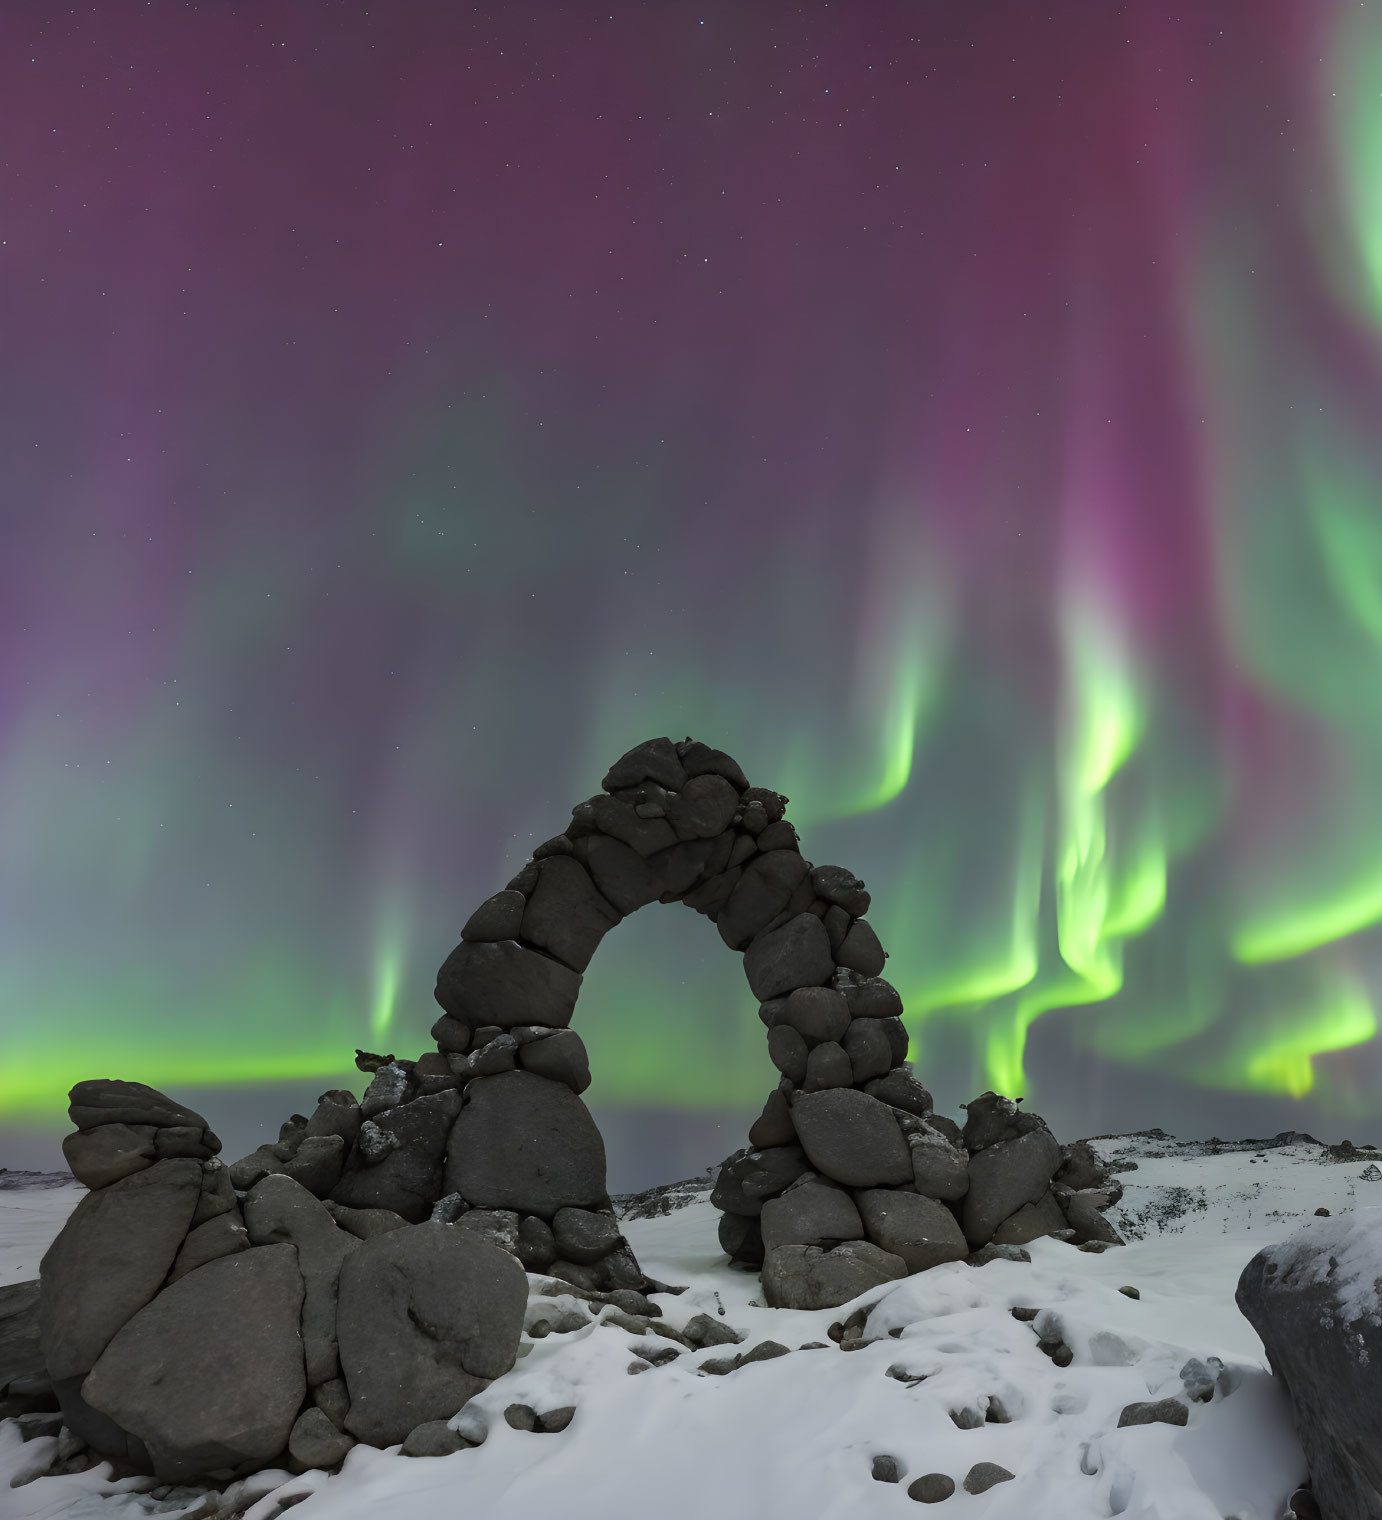 Stone Arch Framed by Northern Lights Over Snowy Landscape